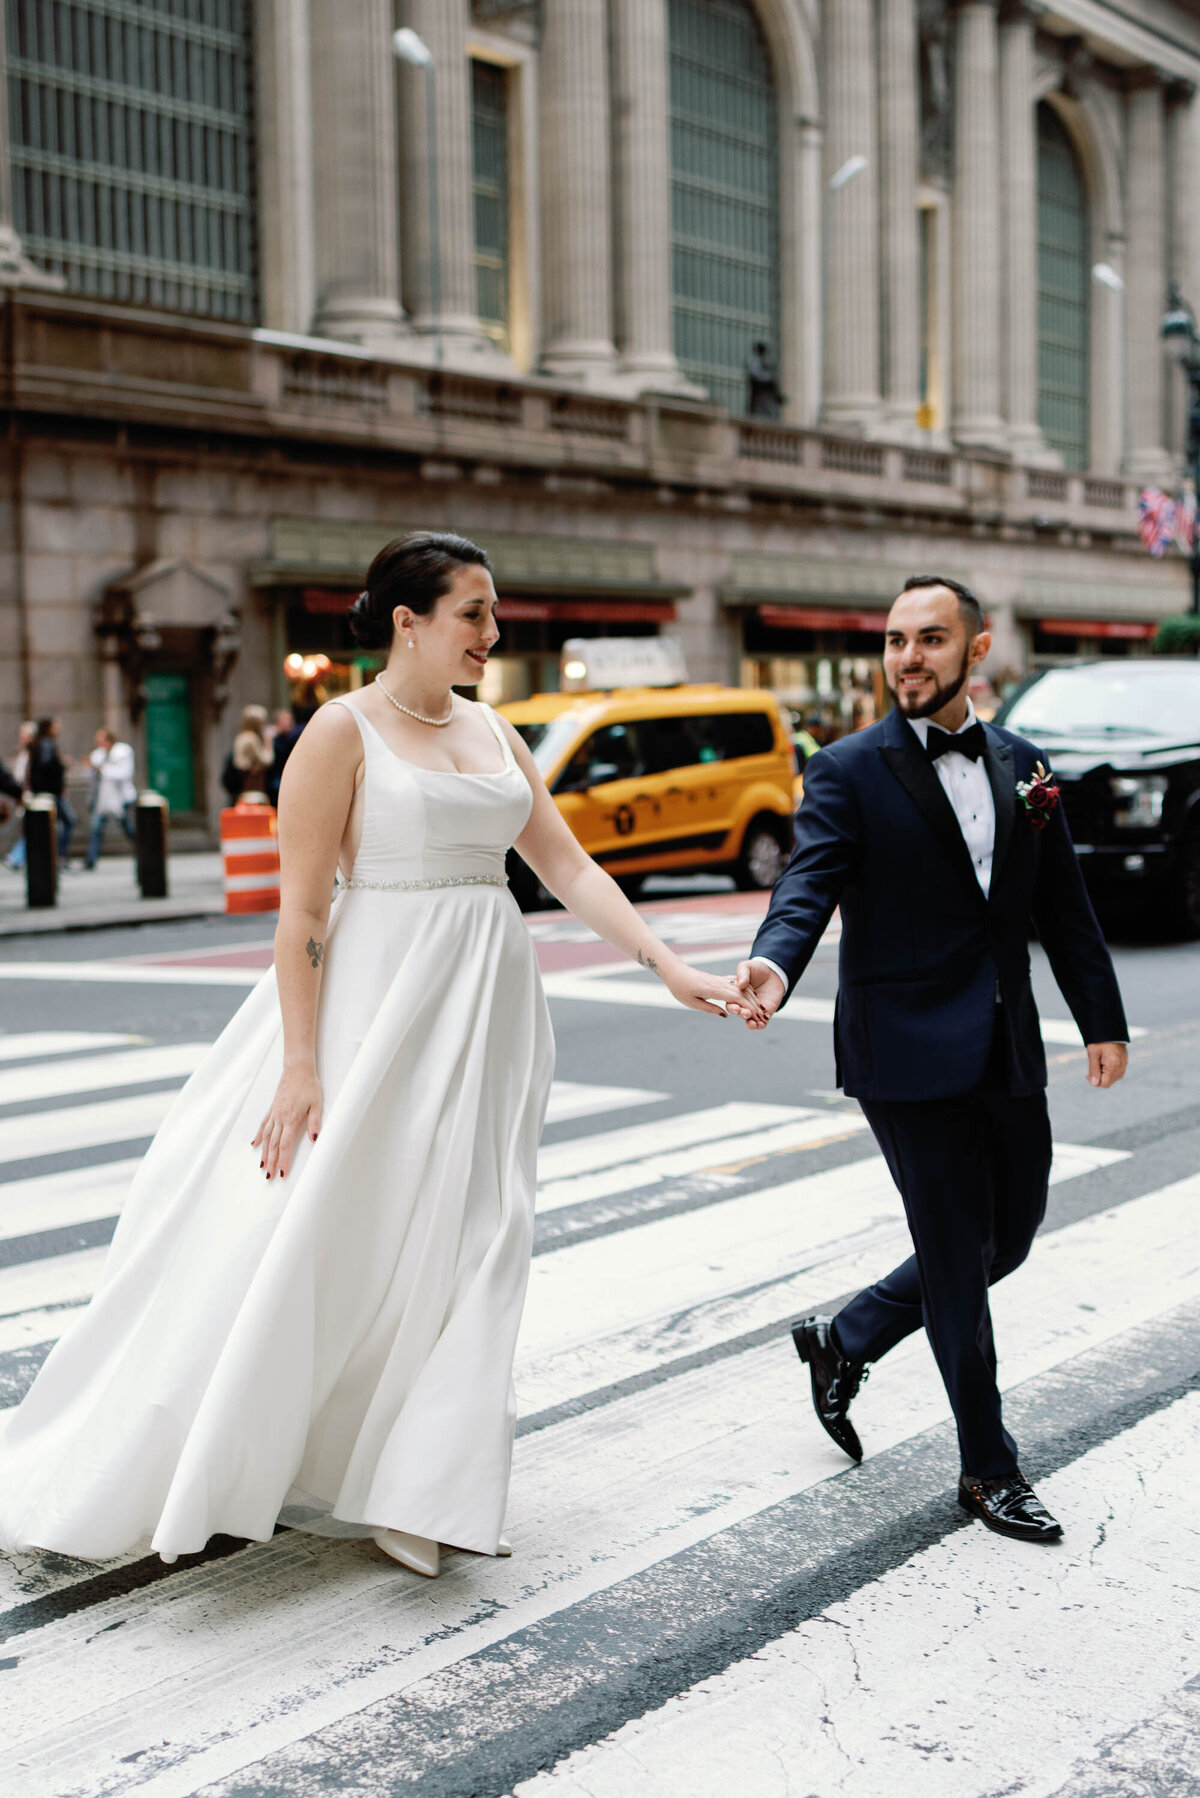 NYC wedding couple walks across street with yellow cab in the background